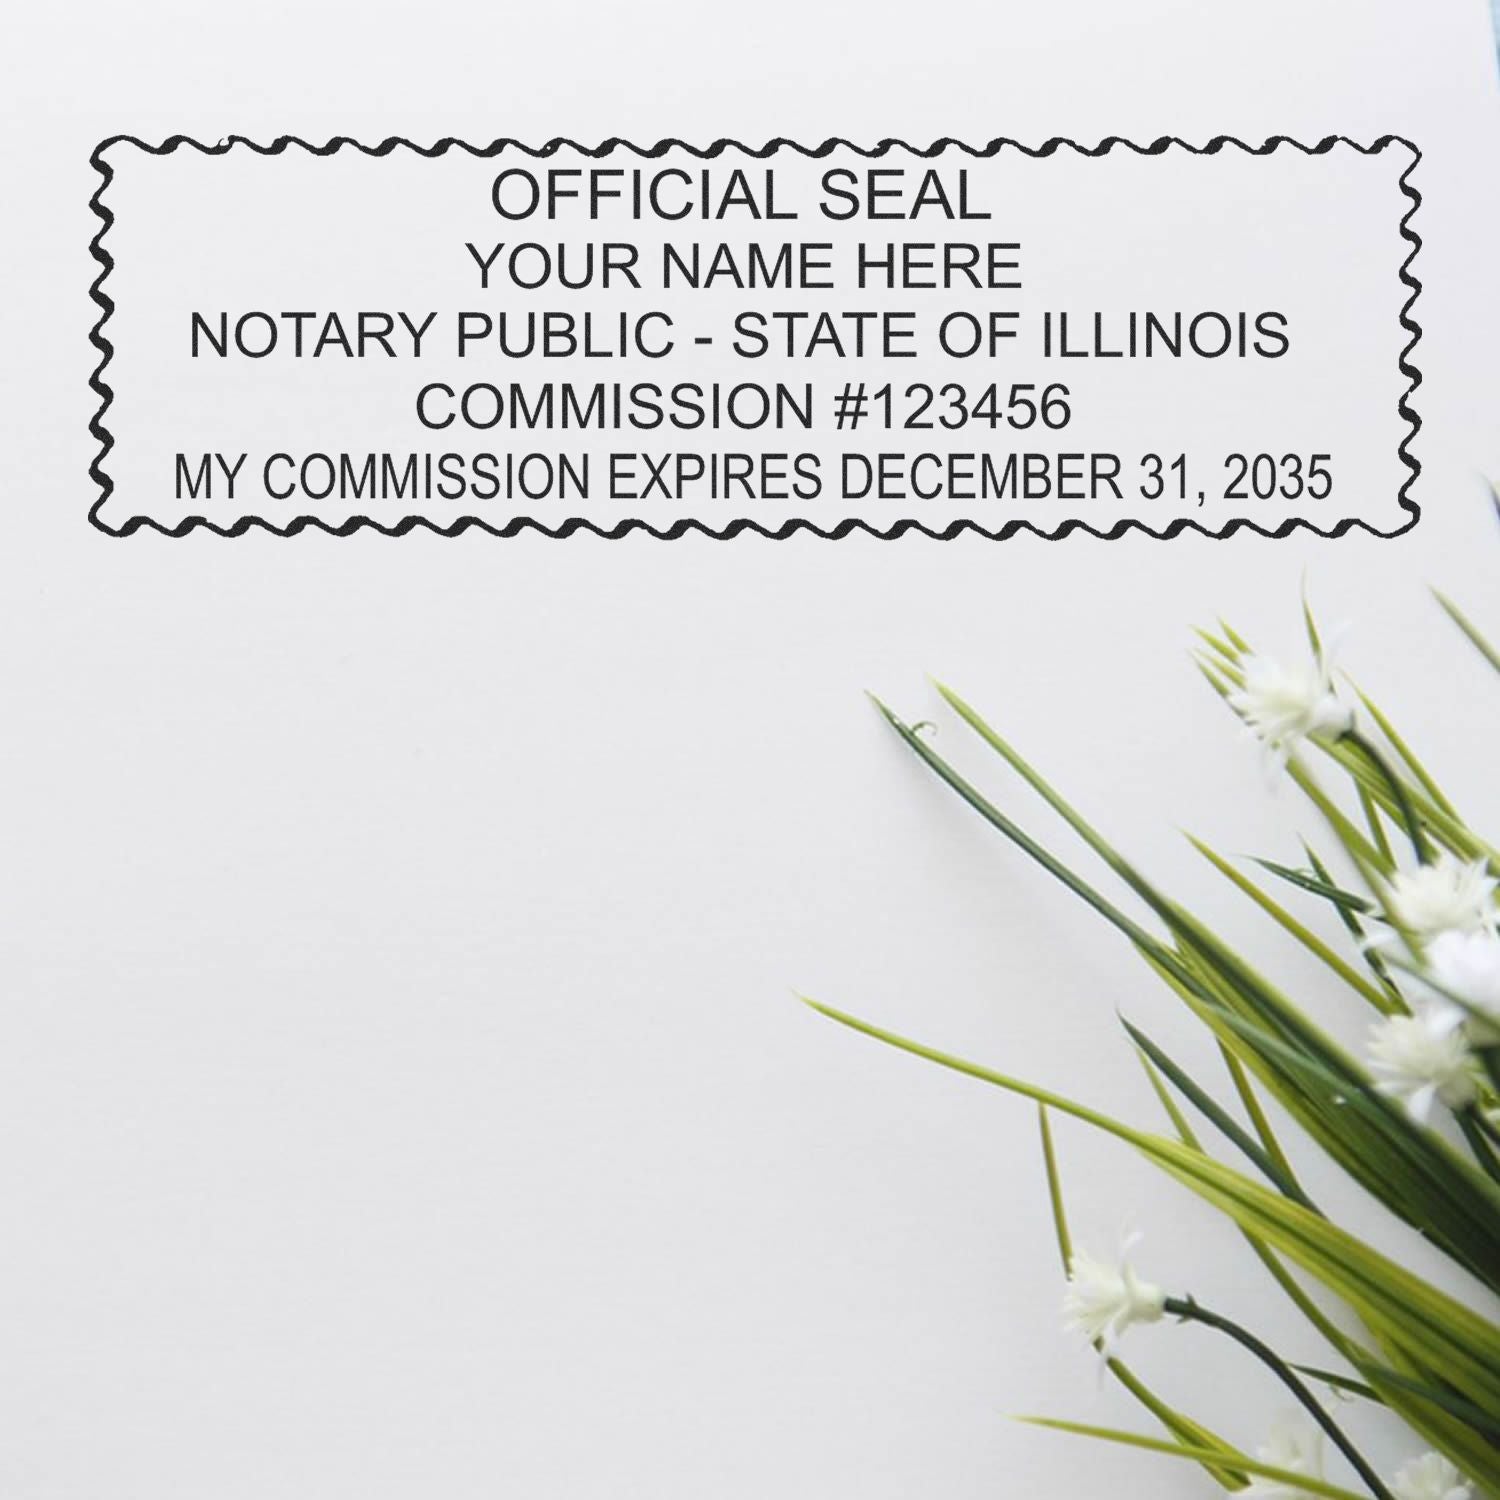 The main image for the PSI Illinois Notary Stamp depicting a sample of the imprint and electronic files